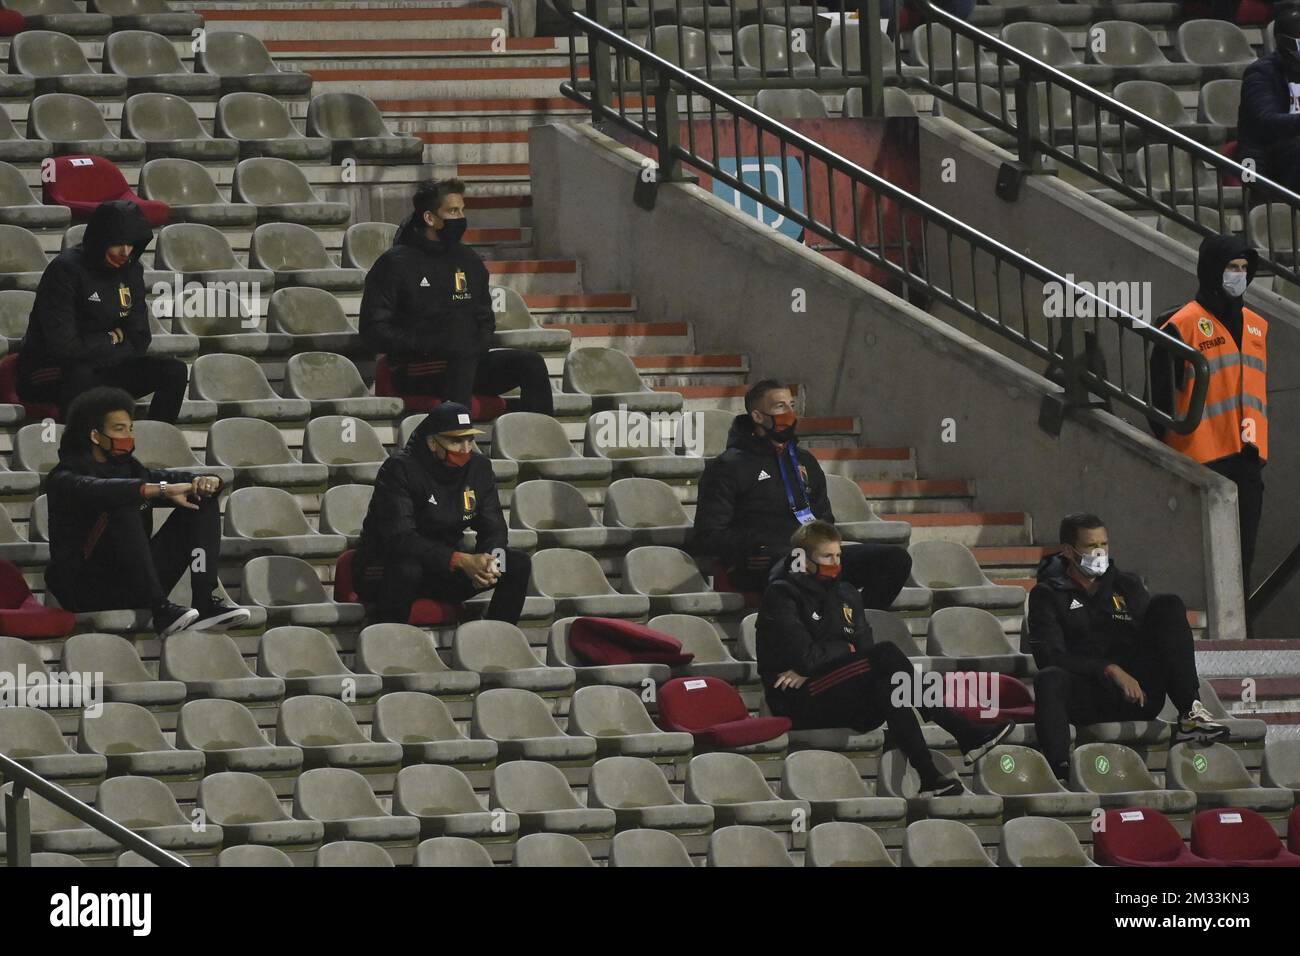 Belgium's players seen in the stands at a friendly game between the Belgian national soccer team Red Devils and Ivory Coast, Thursday 08 October 2020 in Brussels. BELGA PHOTO DIRK WAEM  Stock Photo